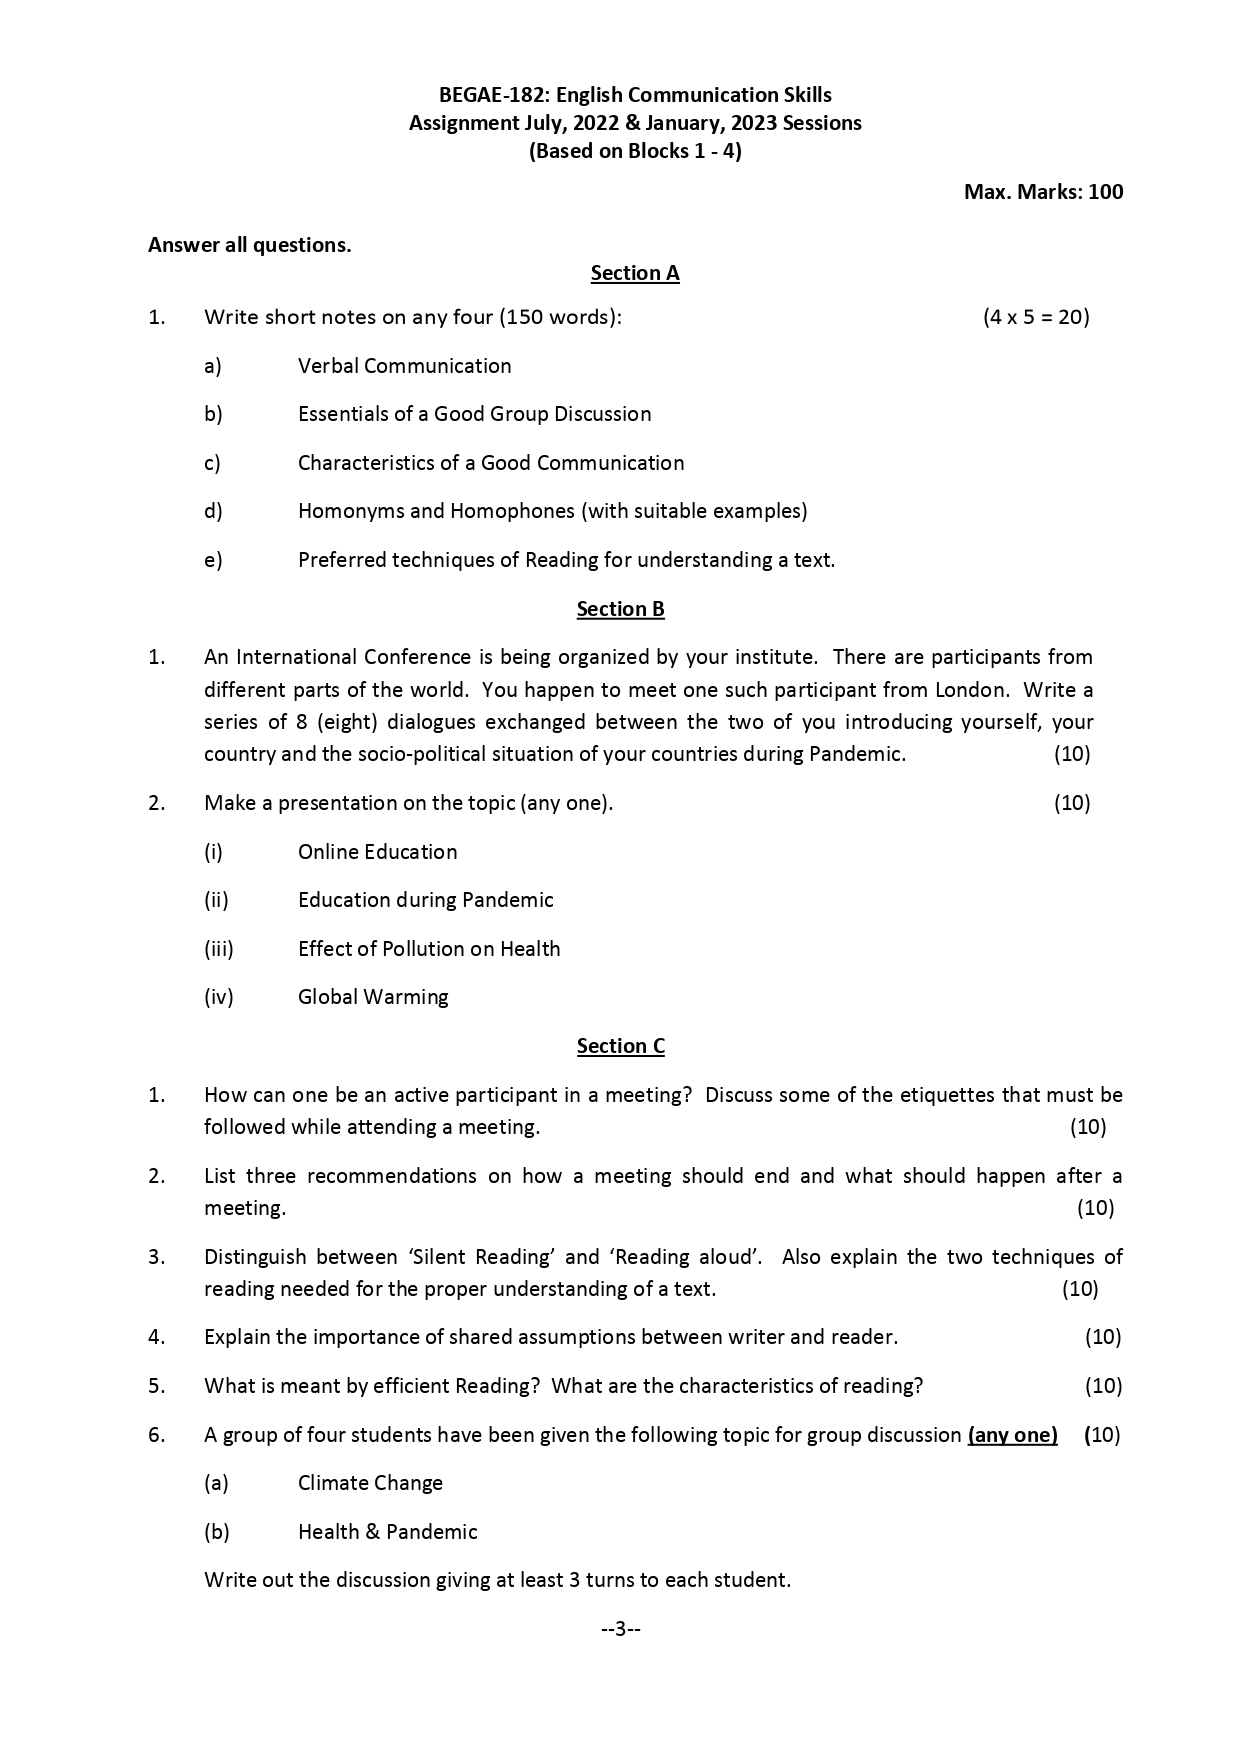 begae 182 assignment question paper 2022 23